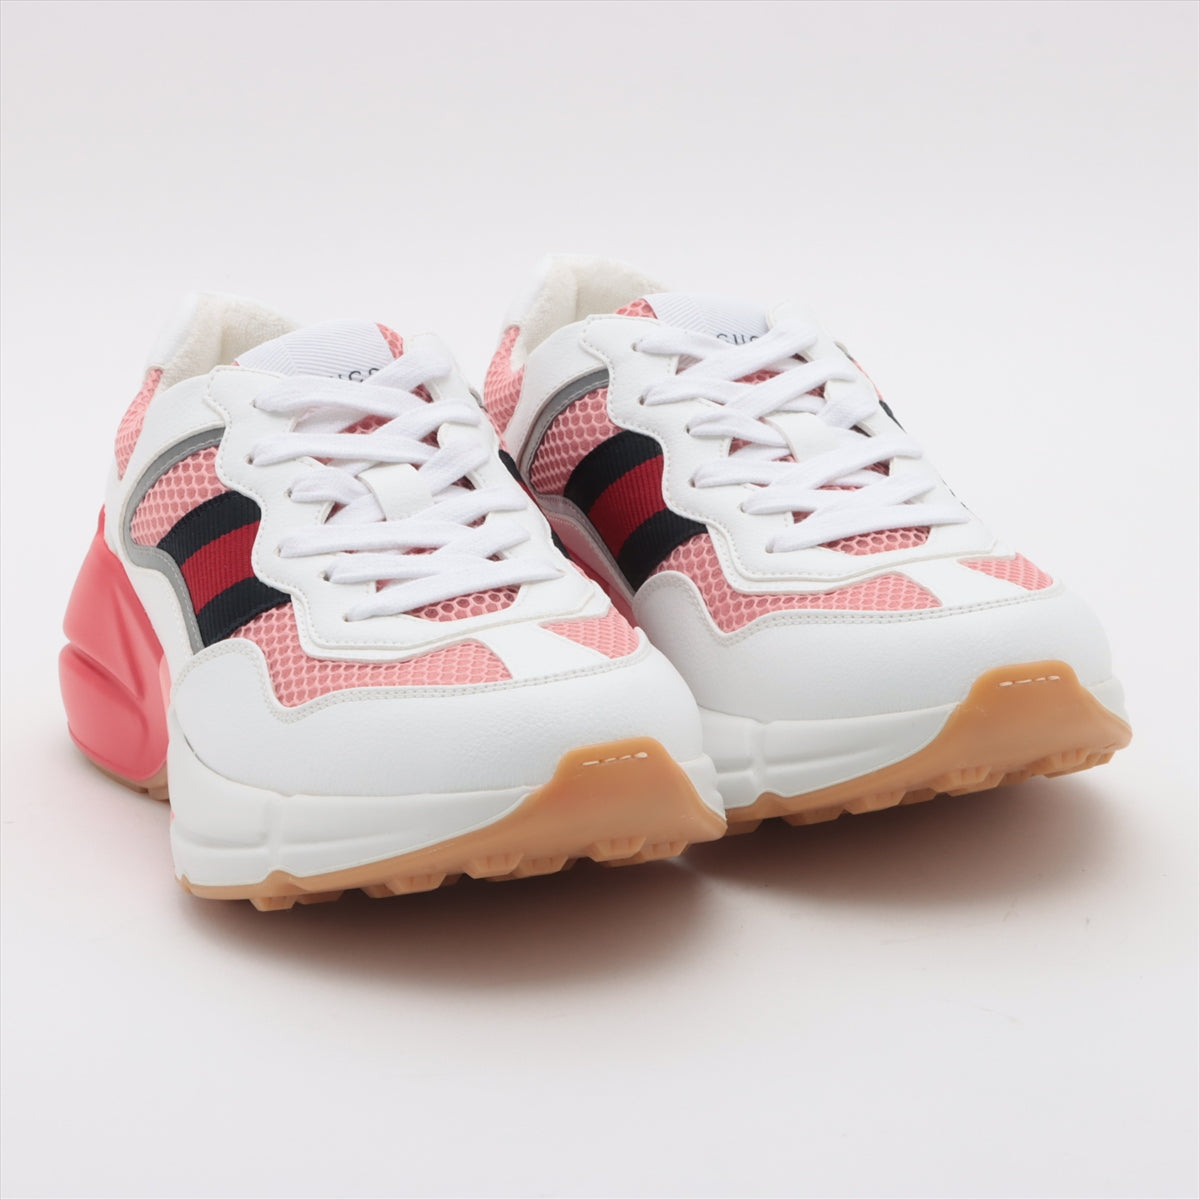 Gucci Righton Leather Sneakers 37 Ladies' White x pink Sherry Line